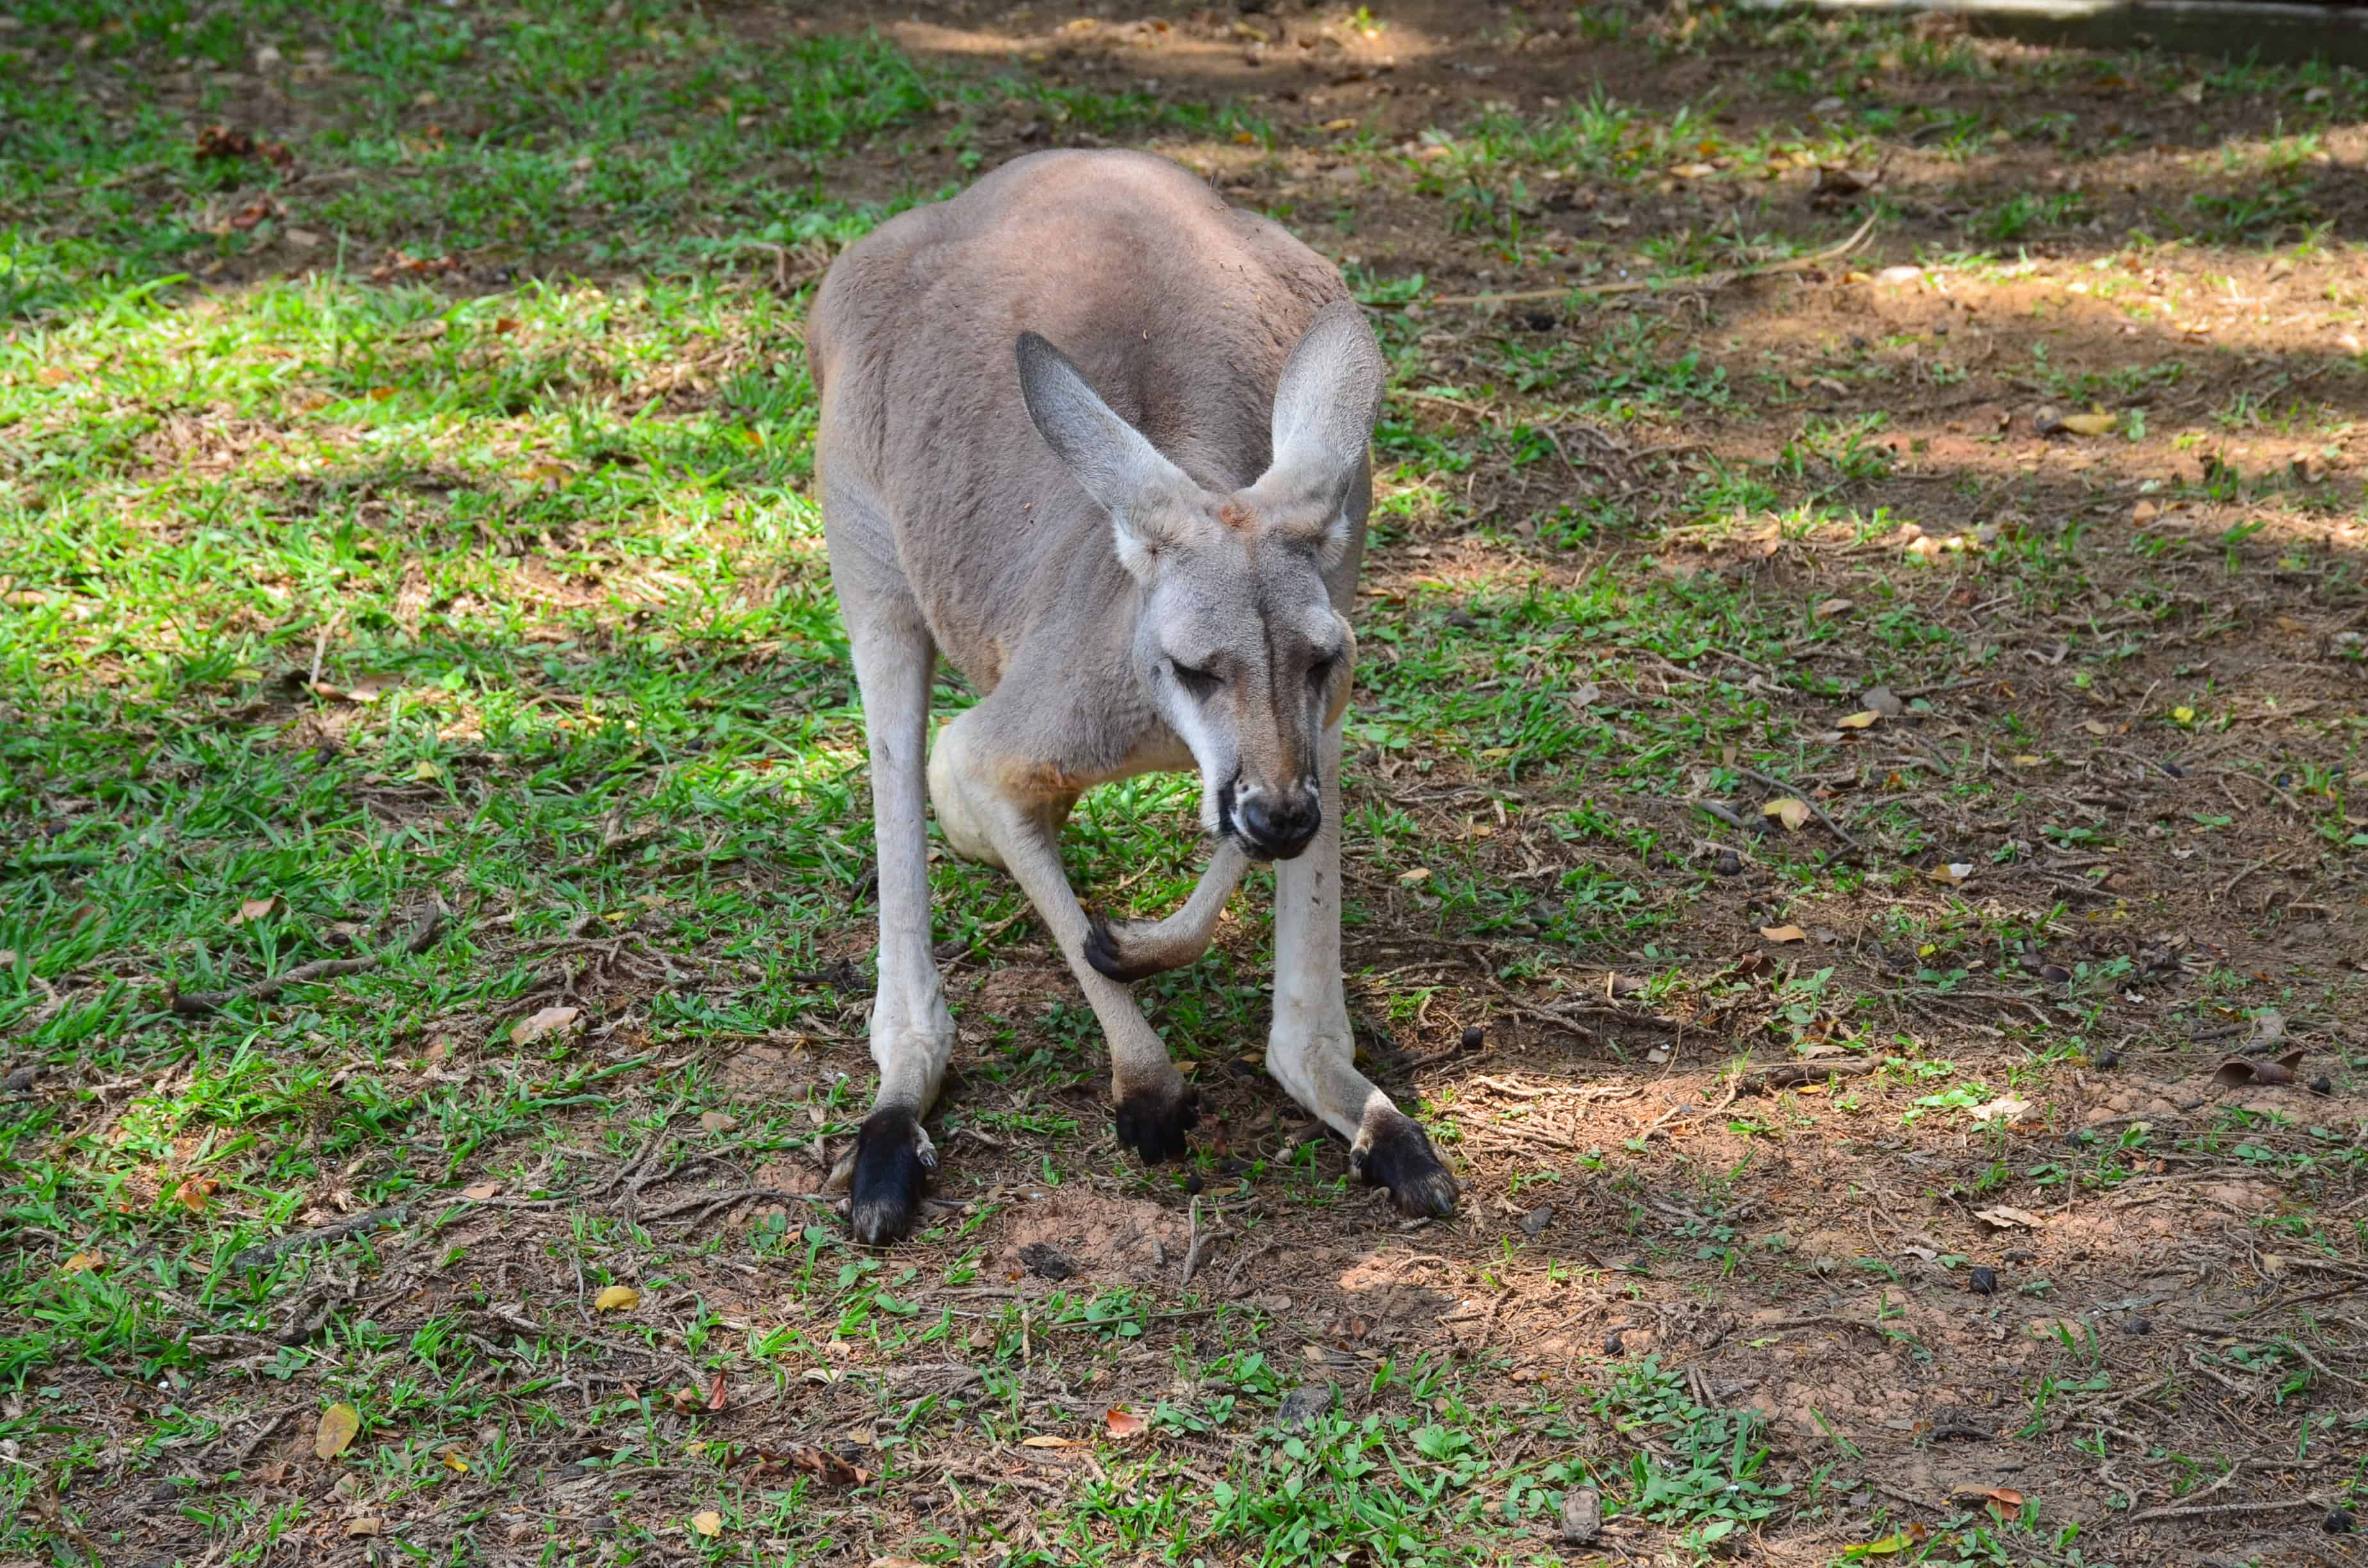 Kangaroo at the Cali Zoo in Colombia